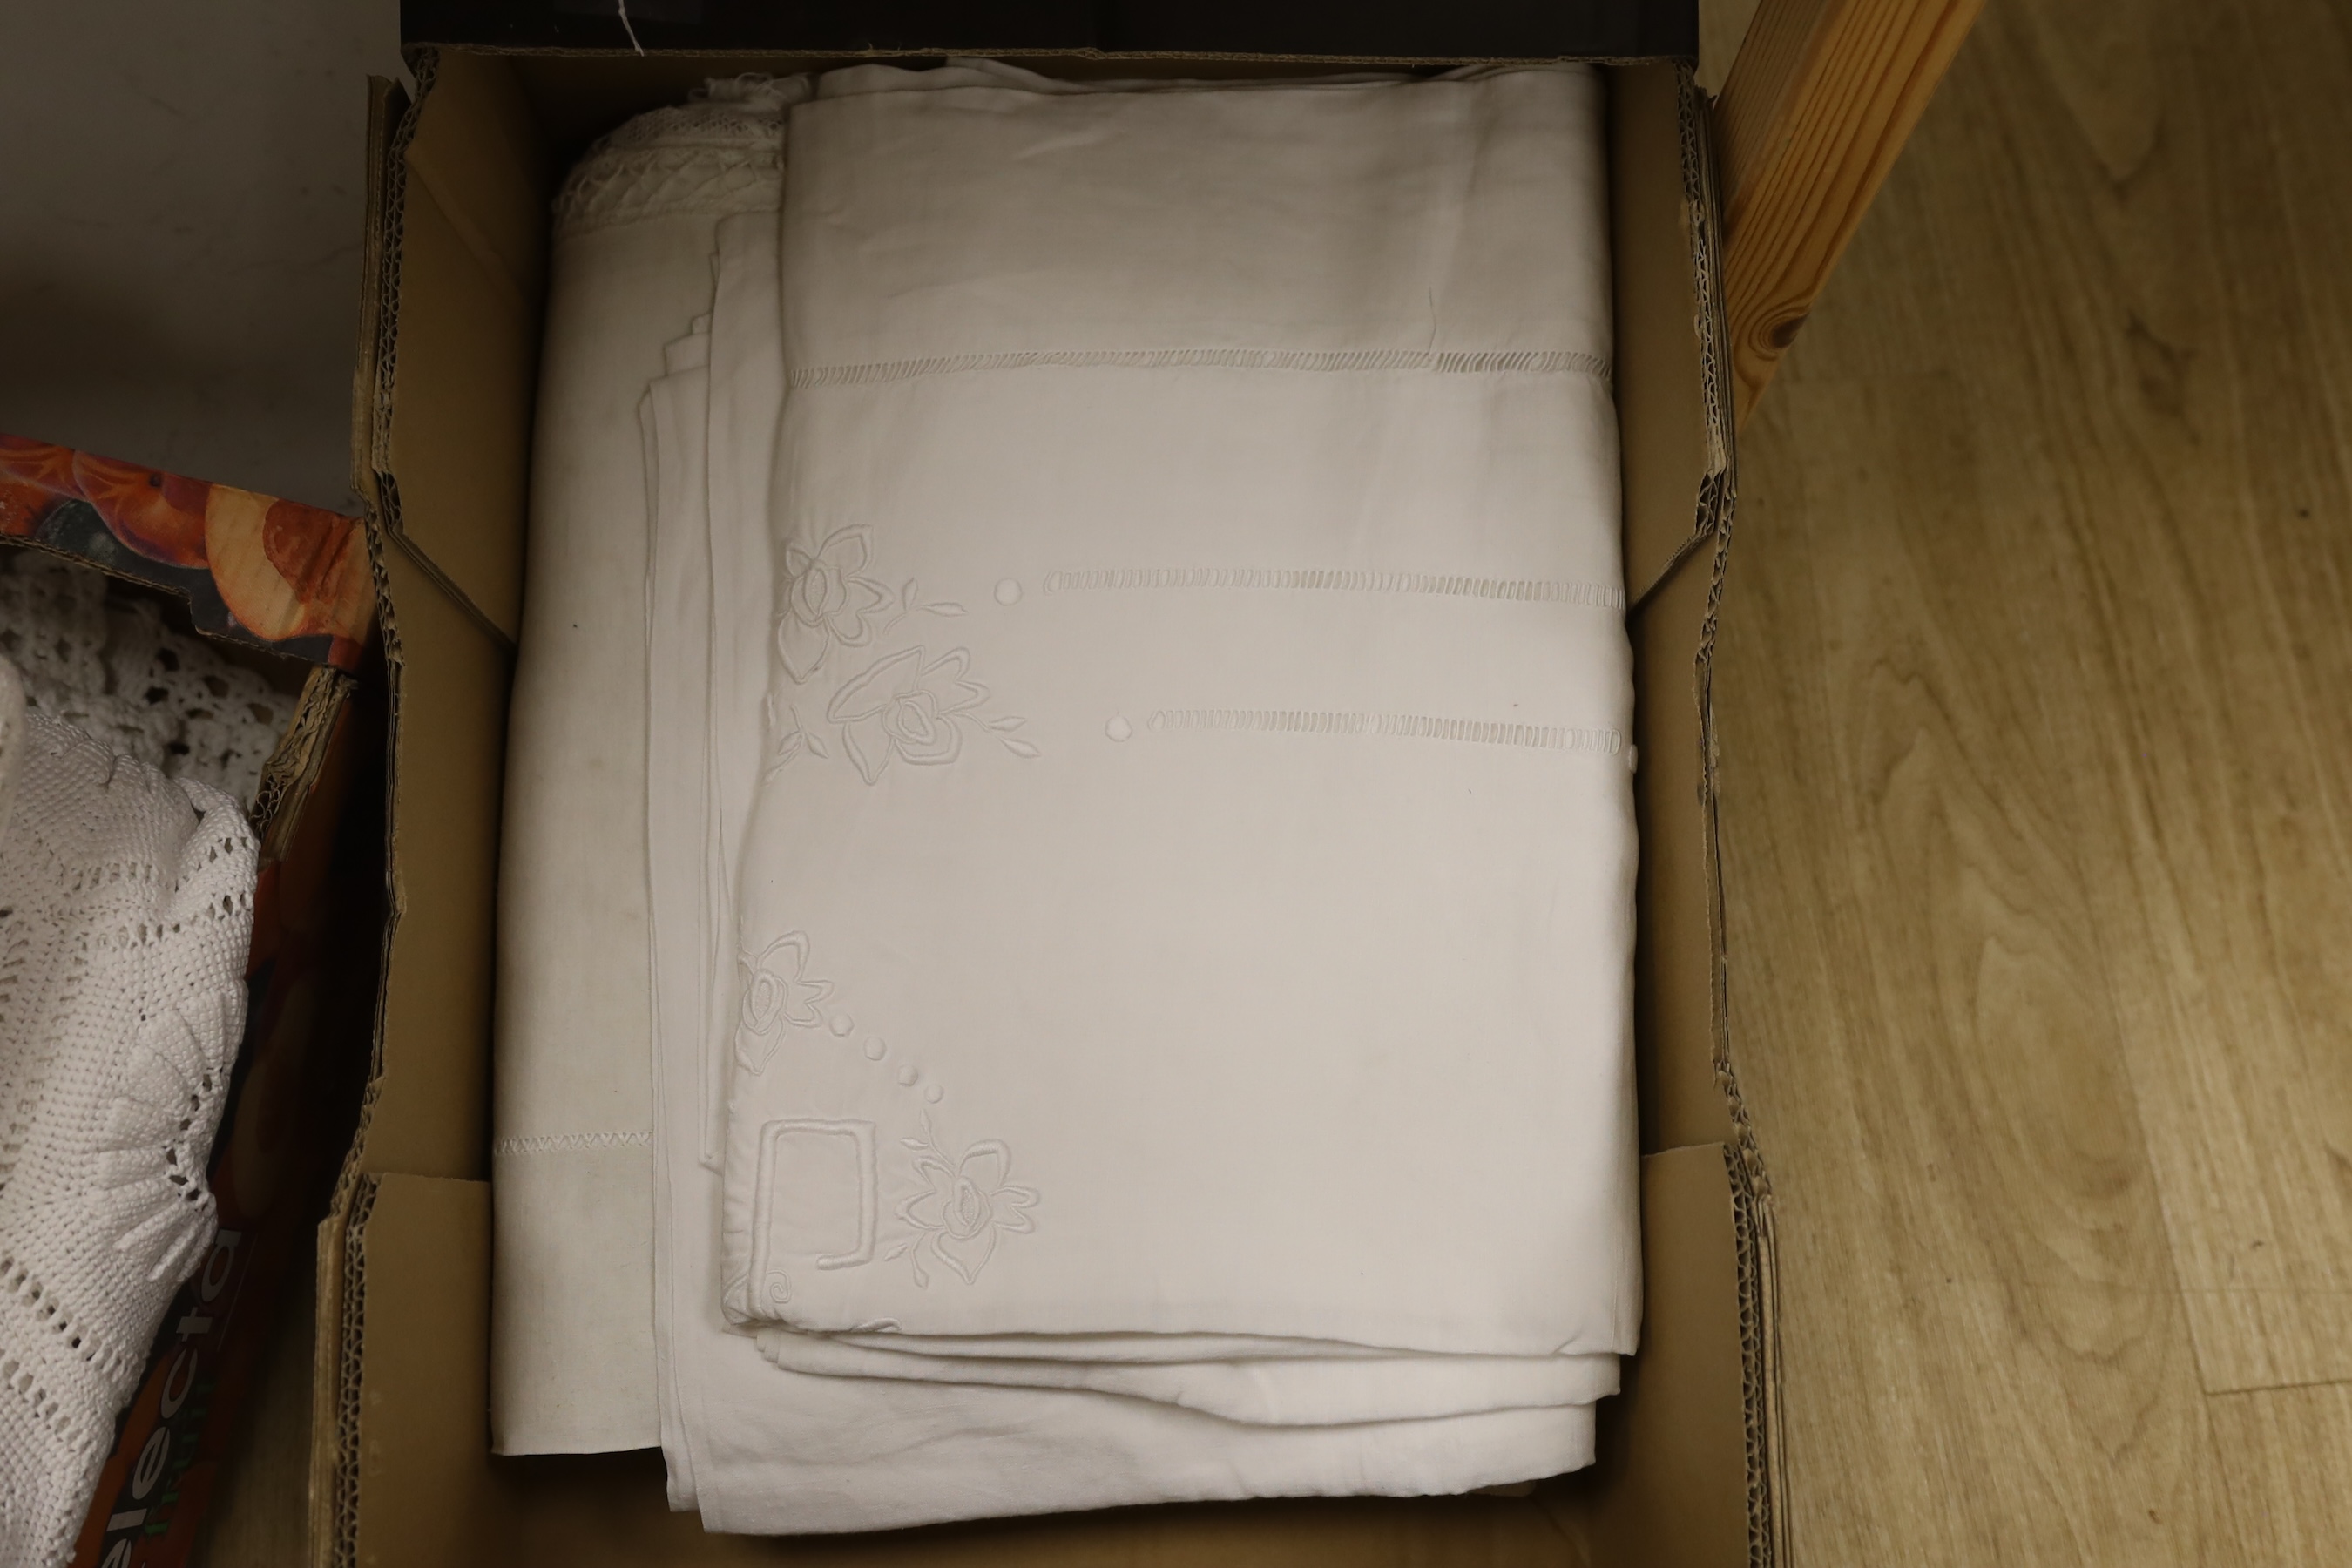 A French provincial crochet edged and monogrammed sheet, a lace inserted and monogrammed sheet, two embroidered and monogrammed sheets (4). Condition - good, all laundered, may need re-laundering